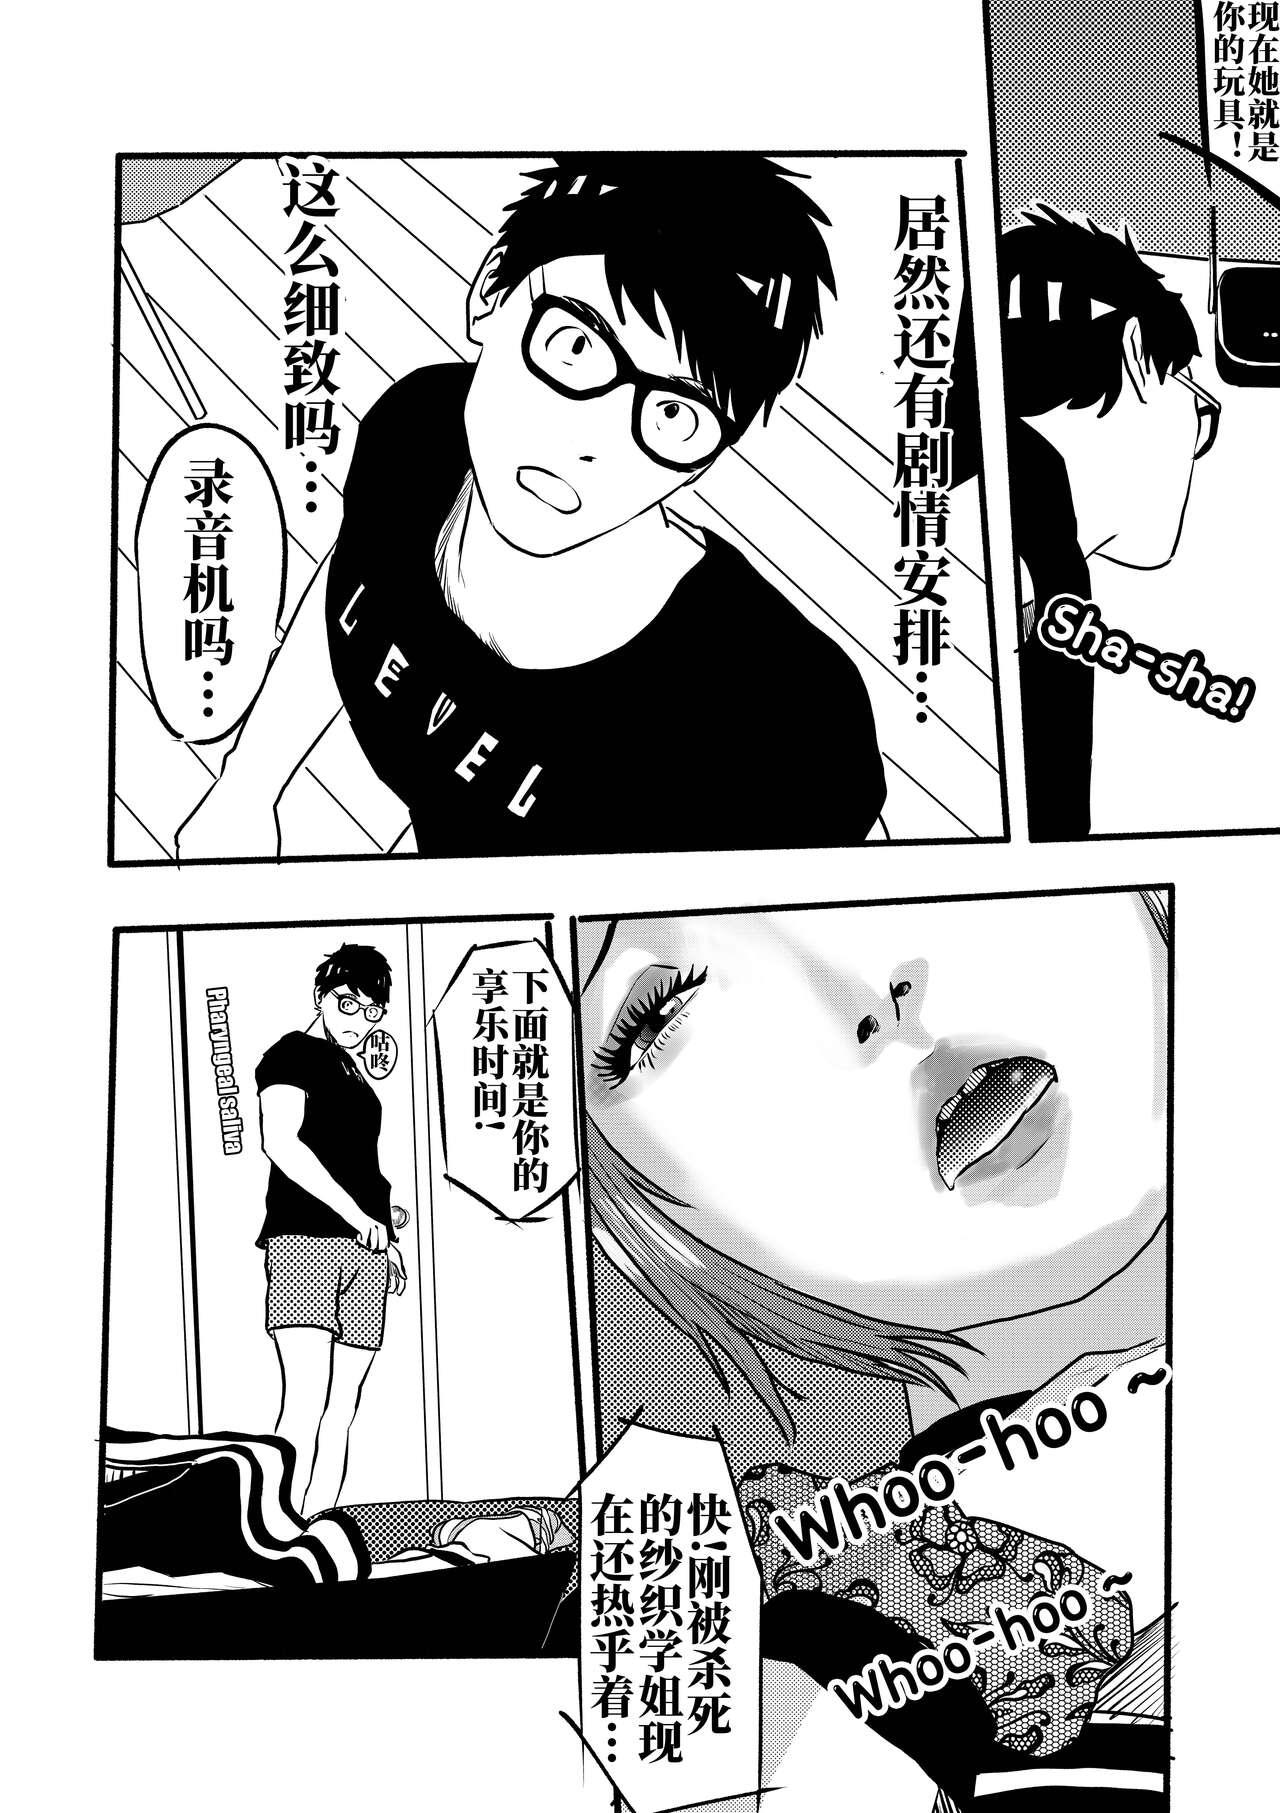 [KAO.YELLOW STUDIO (T.C.X)] I must be out of my mind to fall in love with SAORI, the Snuff Queen Ch.1-16 | 想与冰恋女王纱织同学谈恋爱的我脑子一定有问题 第1-16话 [Chinese] 34